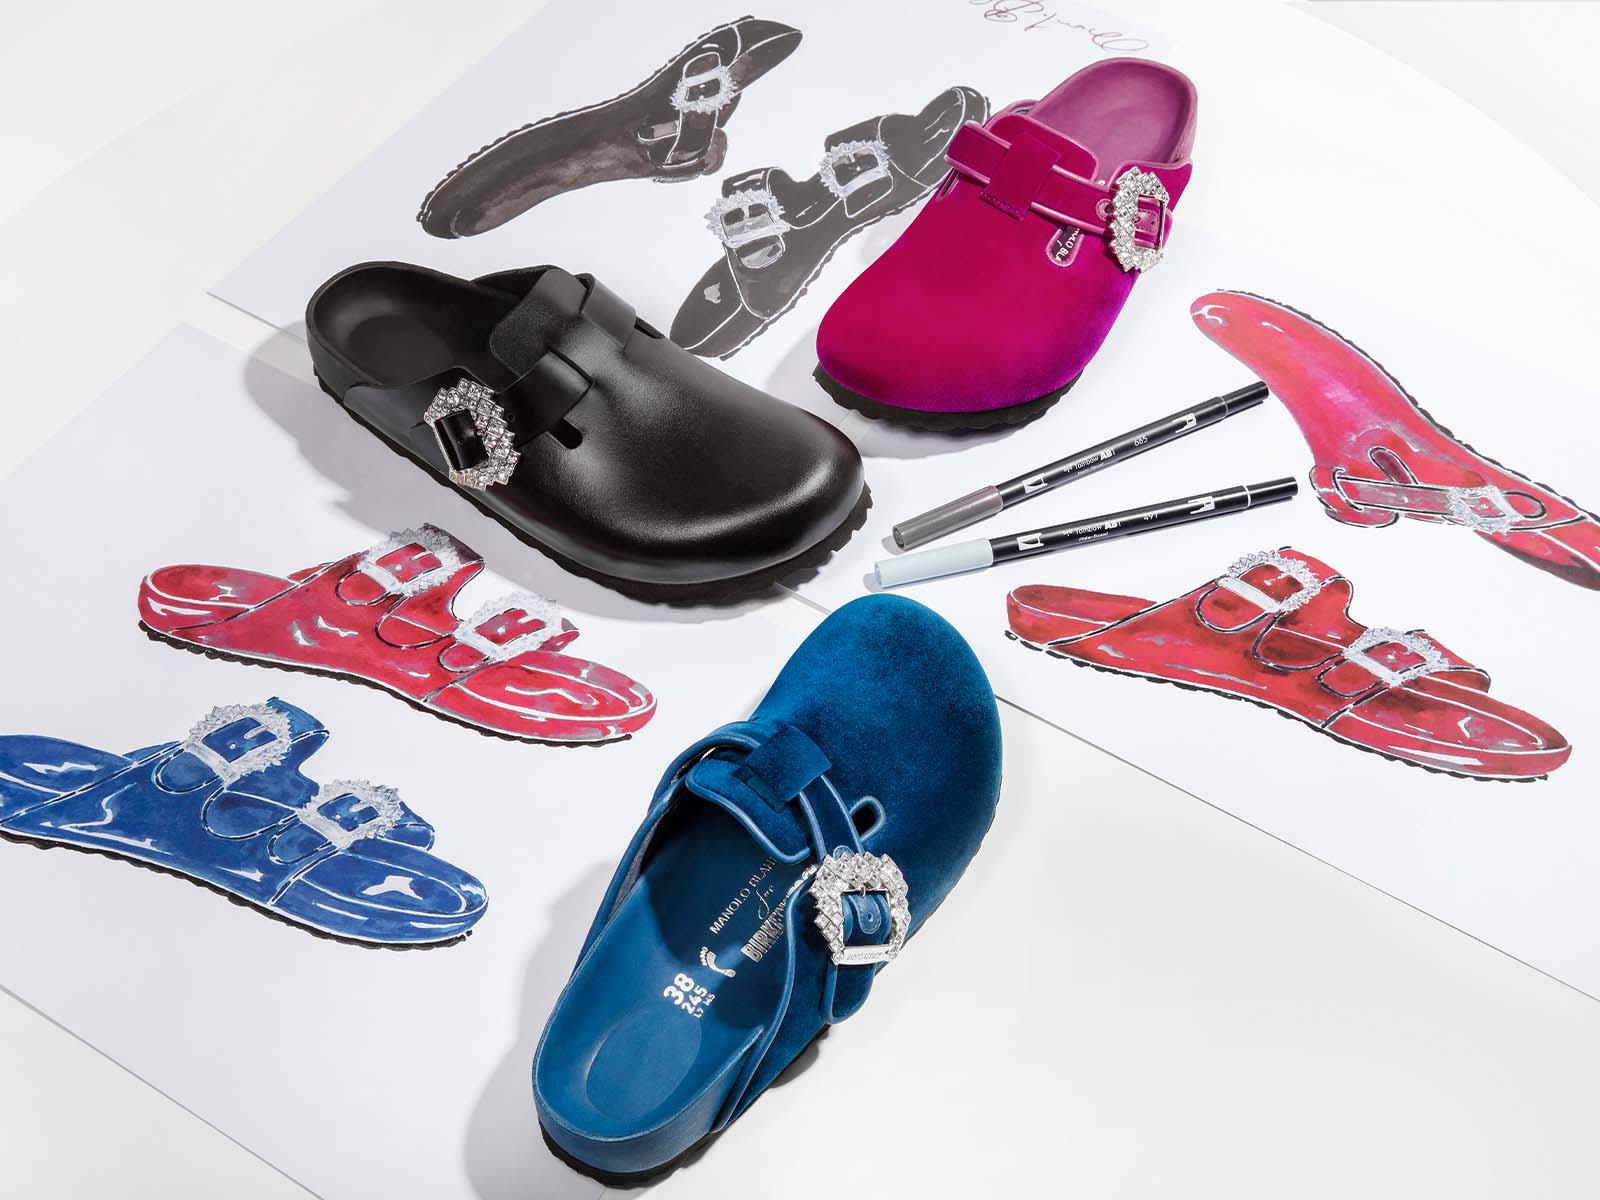 Birkenstock and Manolo Blahnik unveil their first collaboration together